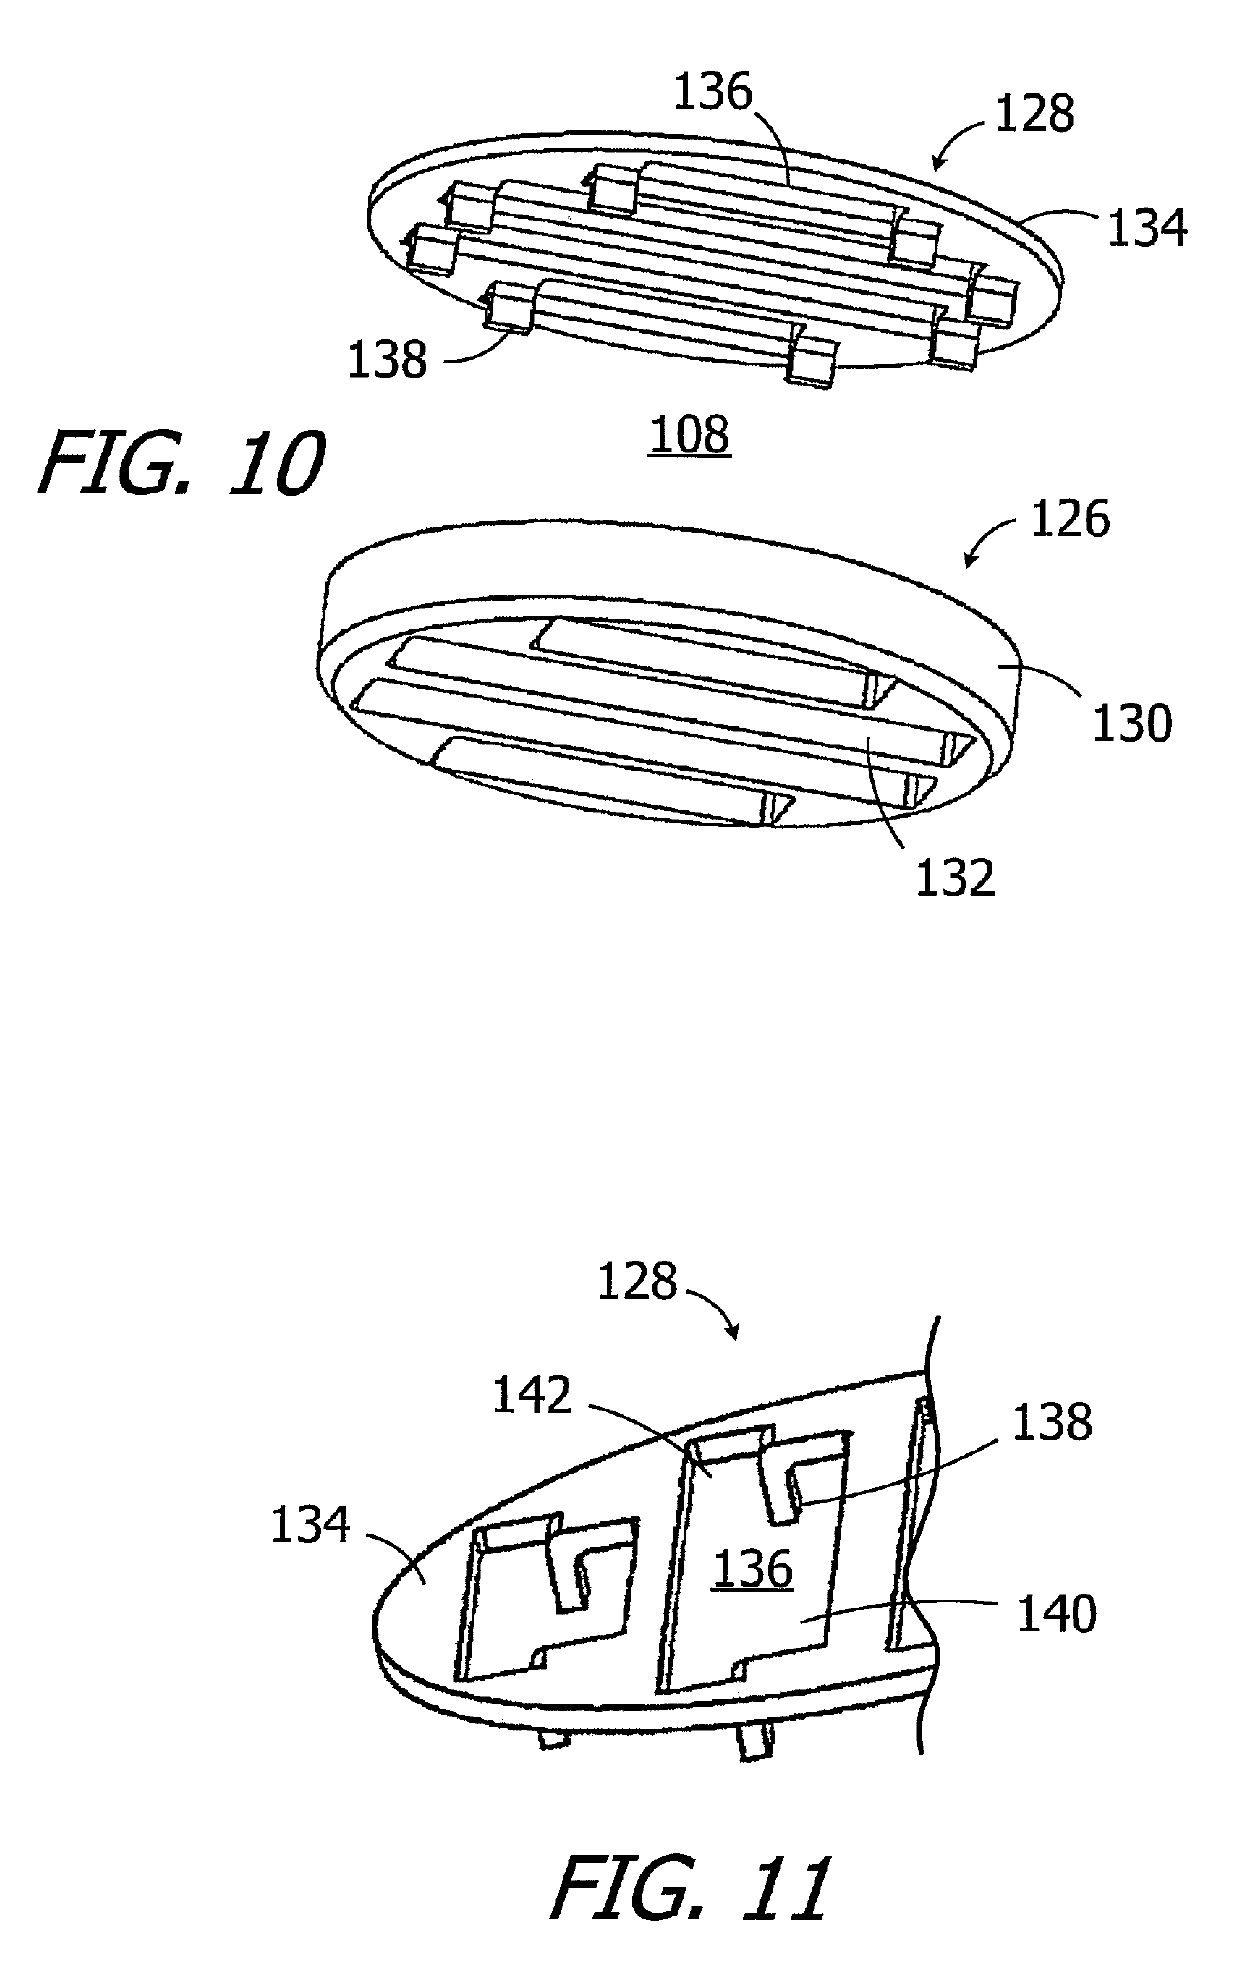 Cochlear implants having MRI-compatible magnet apparatus and associated methods